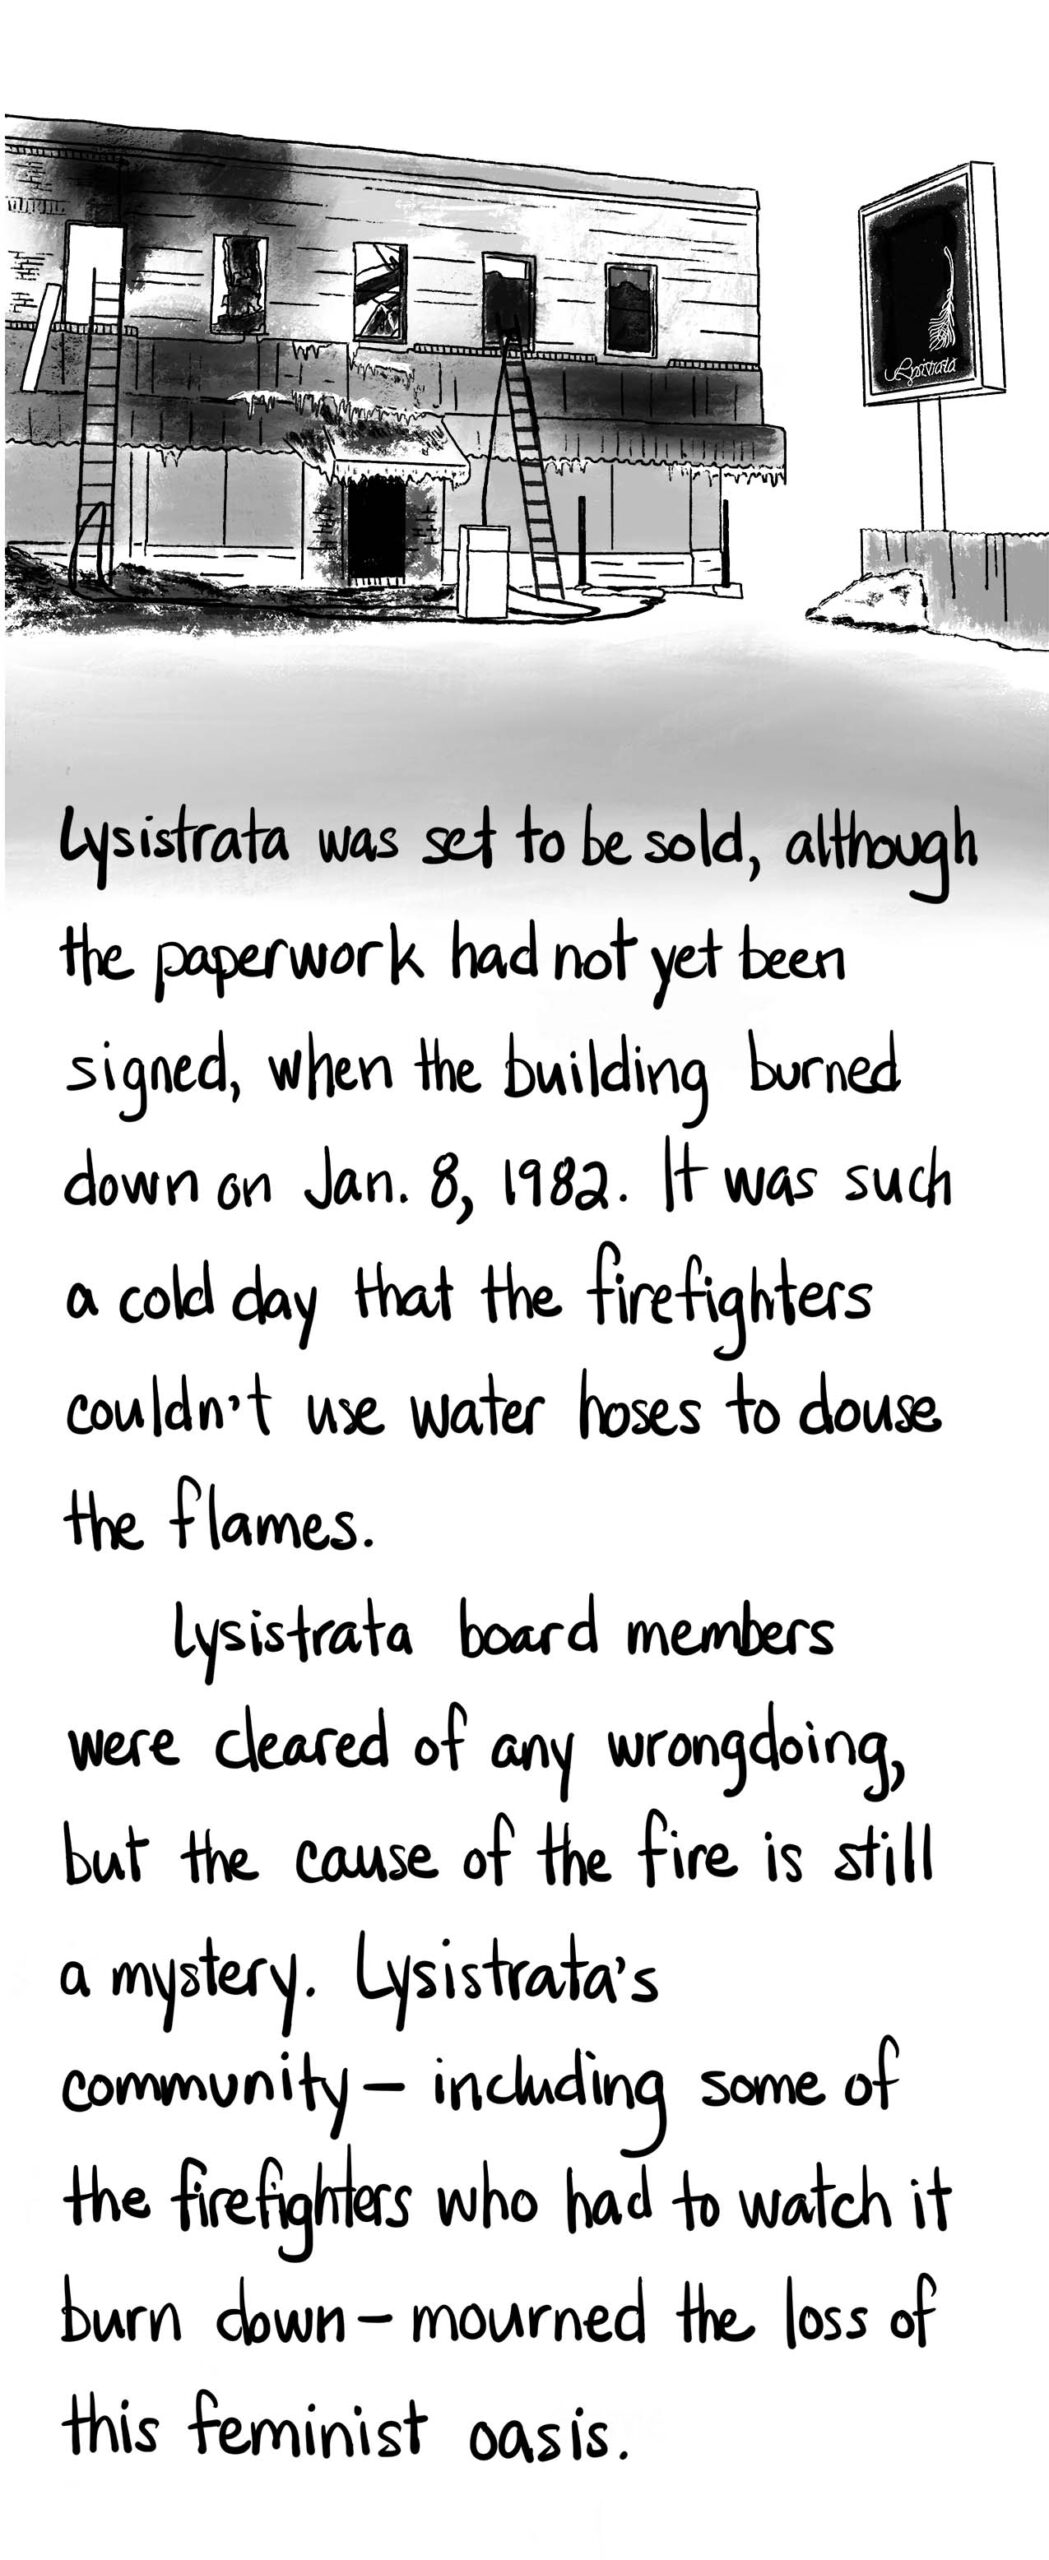 Illustration of a burned building. Lysistrata was set to be sold, although the paperwork had not yet been signed, when the building burned down on Jan. 8, 1982. It was such a cold day that the firefighters couldn’t use water hoses to douse the flames. Lysistrata board members were cleared of any wrongdoing, but the cause of the fire is still a mystery. Lysistrata’s community — including some of the firefighters who had to watch it burn down — mourned the loss of this feminist oasis.